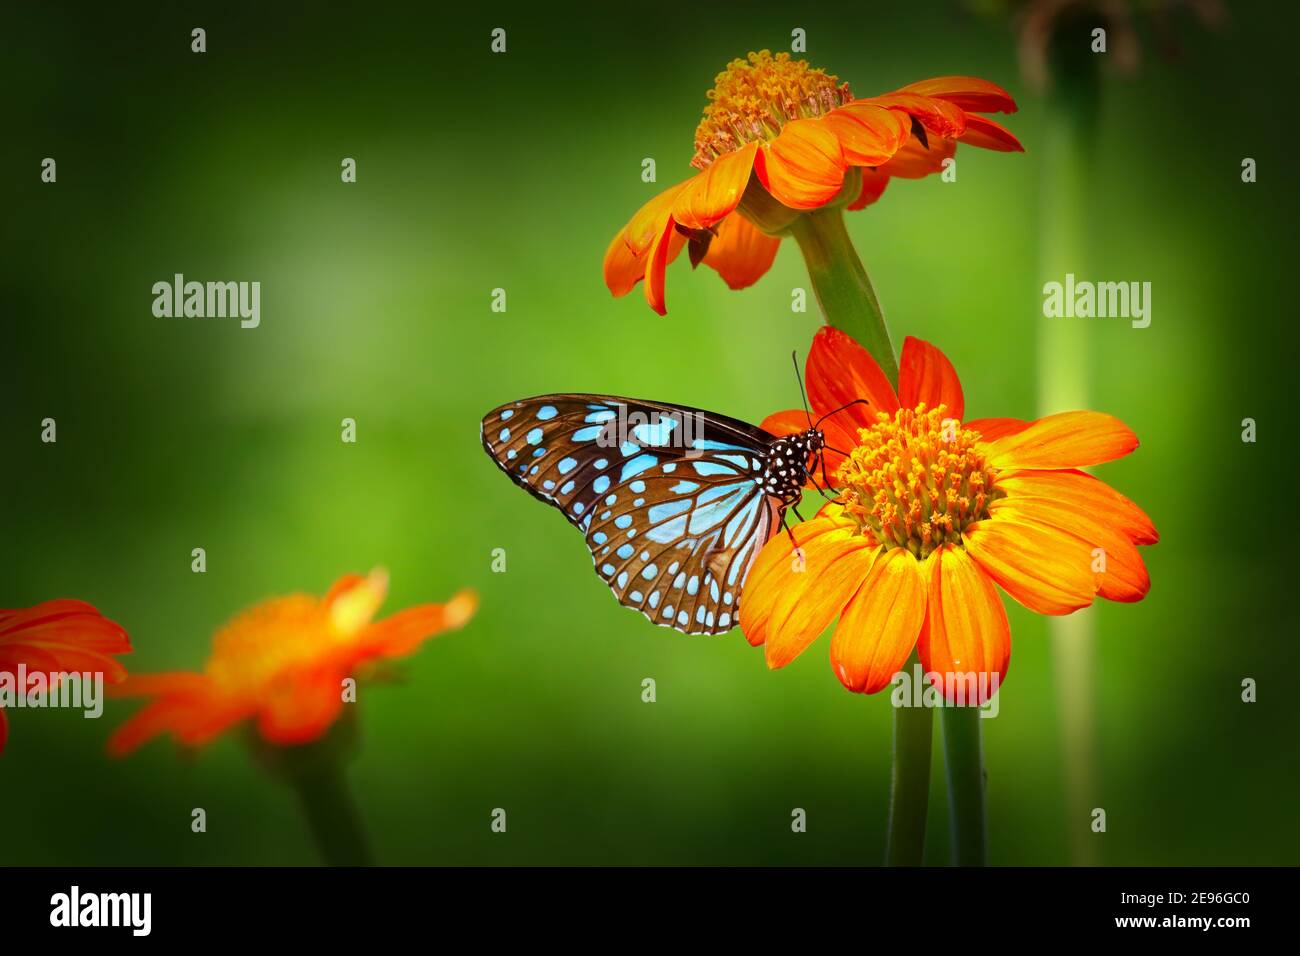 Butterfly Blue Tiger or Danaid Tirumala limniace on orange flower the red sunflower or Mexican sunflower (Tithonia rotundifolia, Asteraceae family), Stock Photo